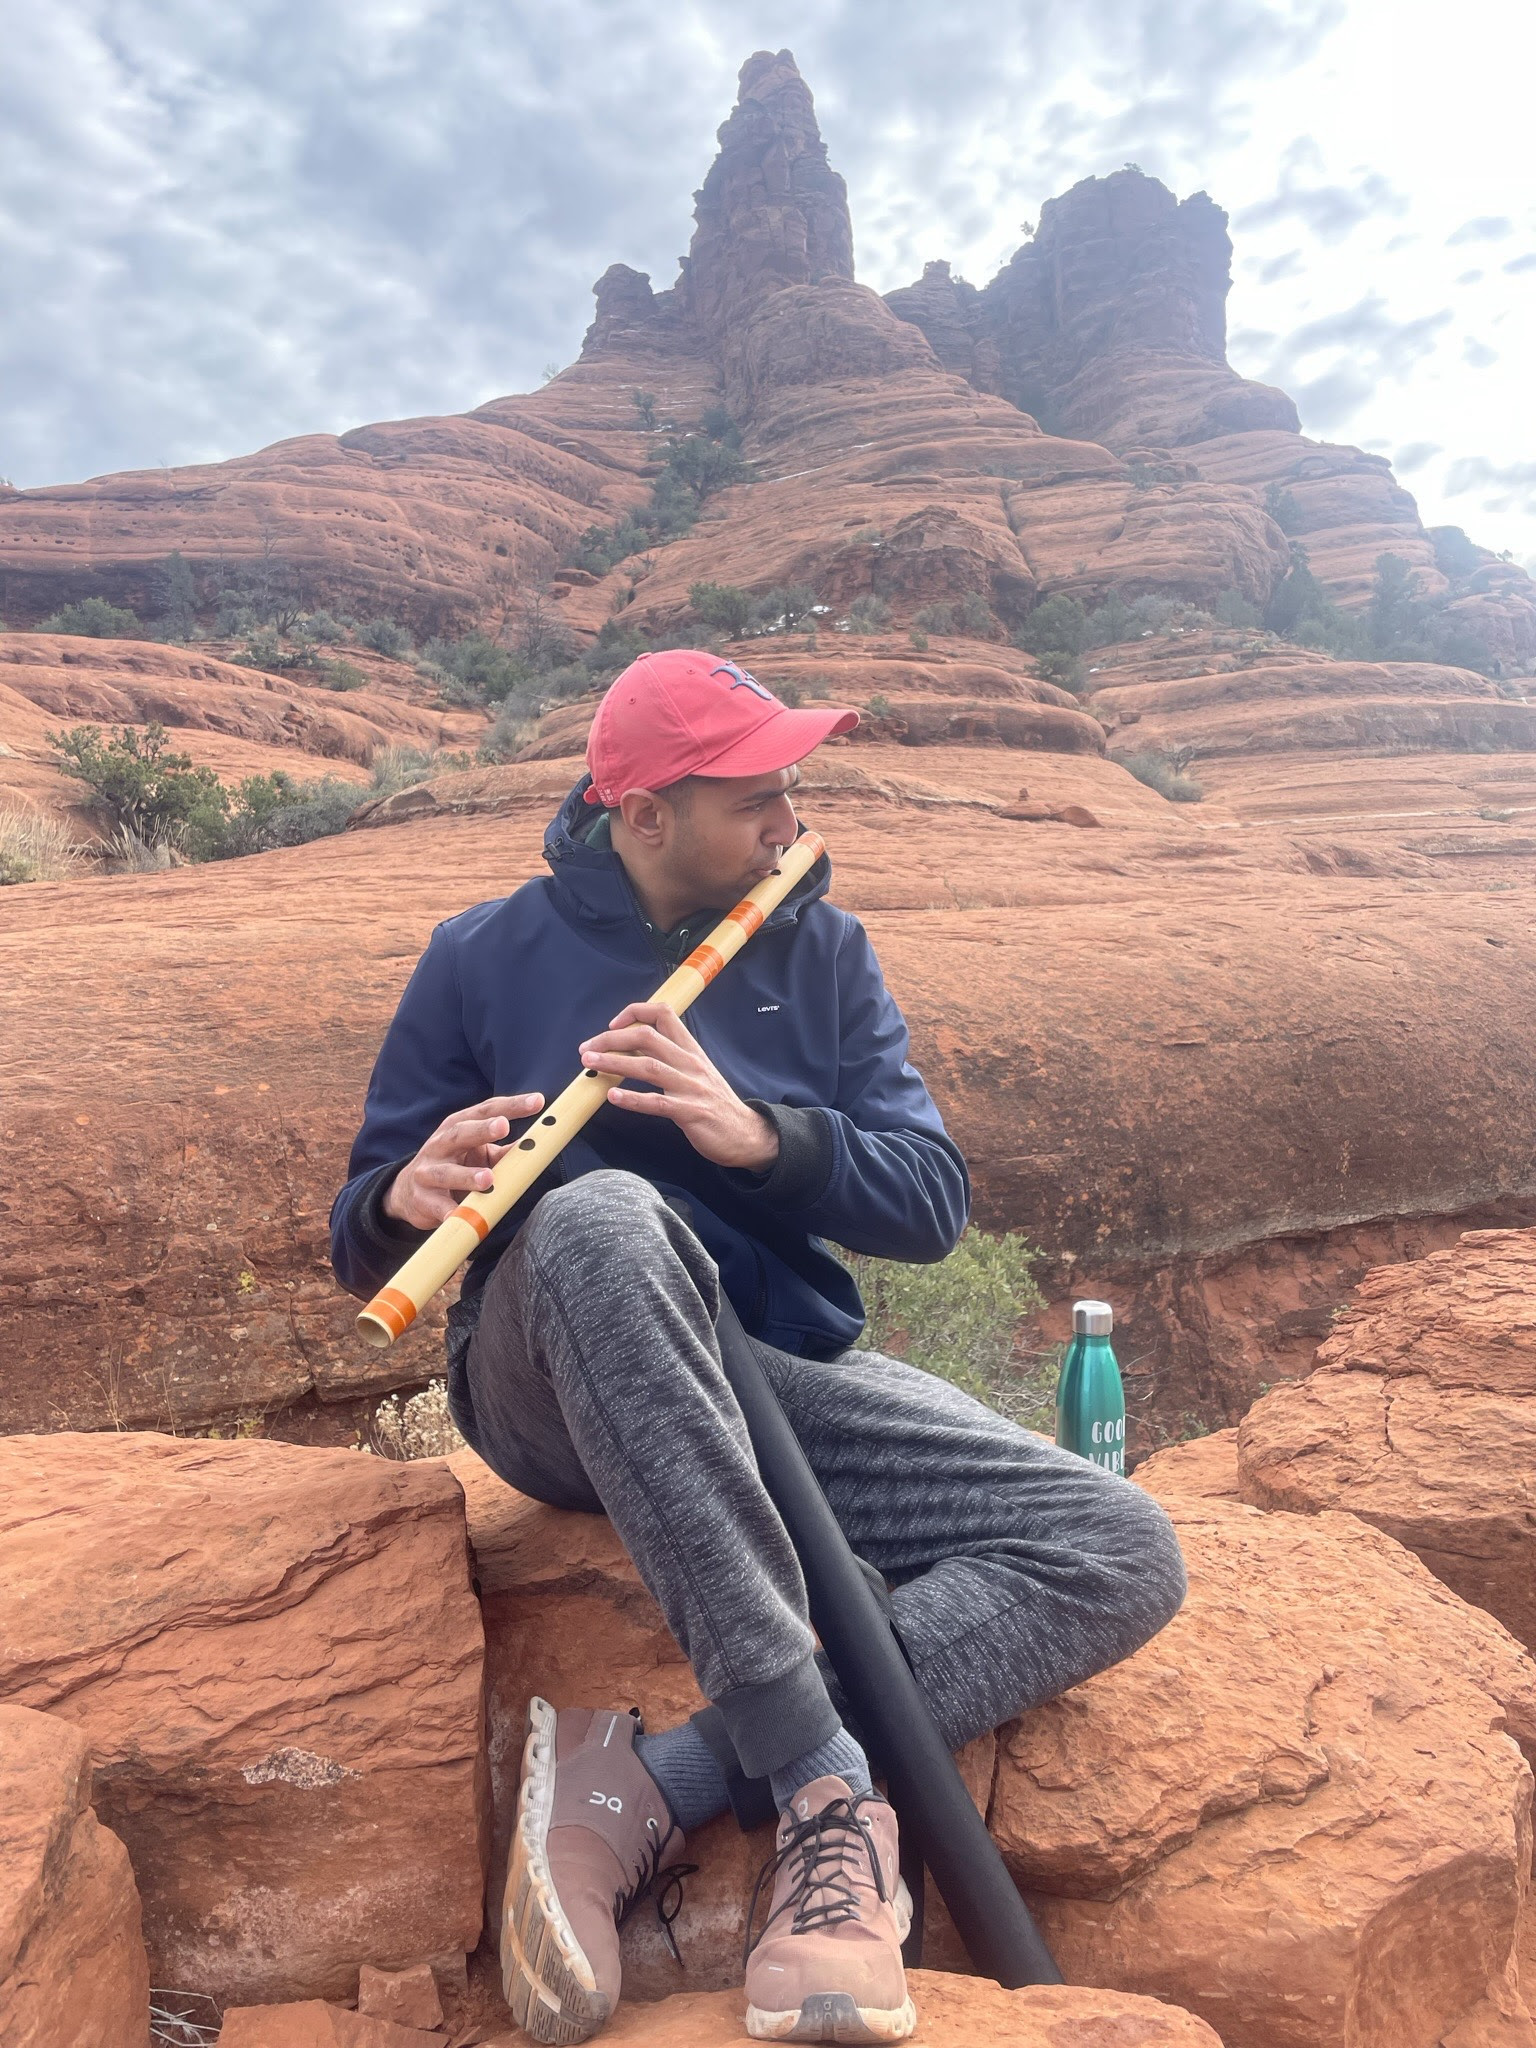 Man in blue sweatshirt, gray pants and red baseball hat sitting on red rock playing a wooden flute with mountains in the background.